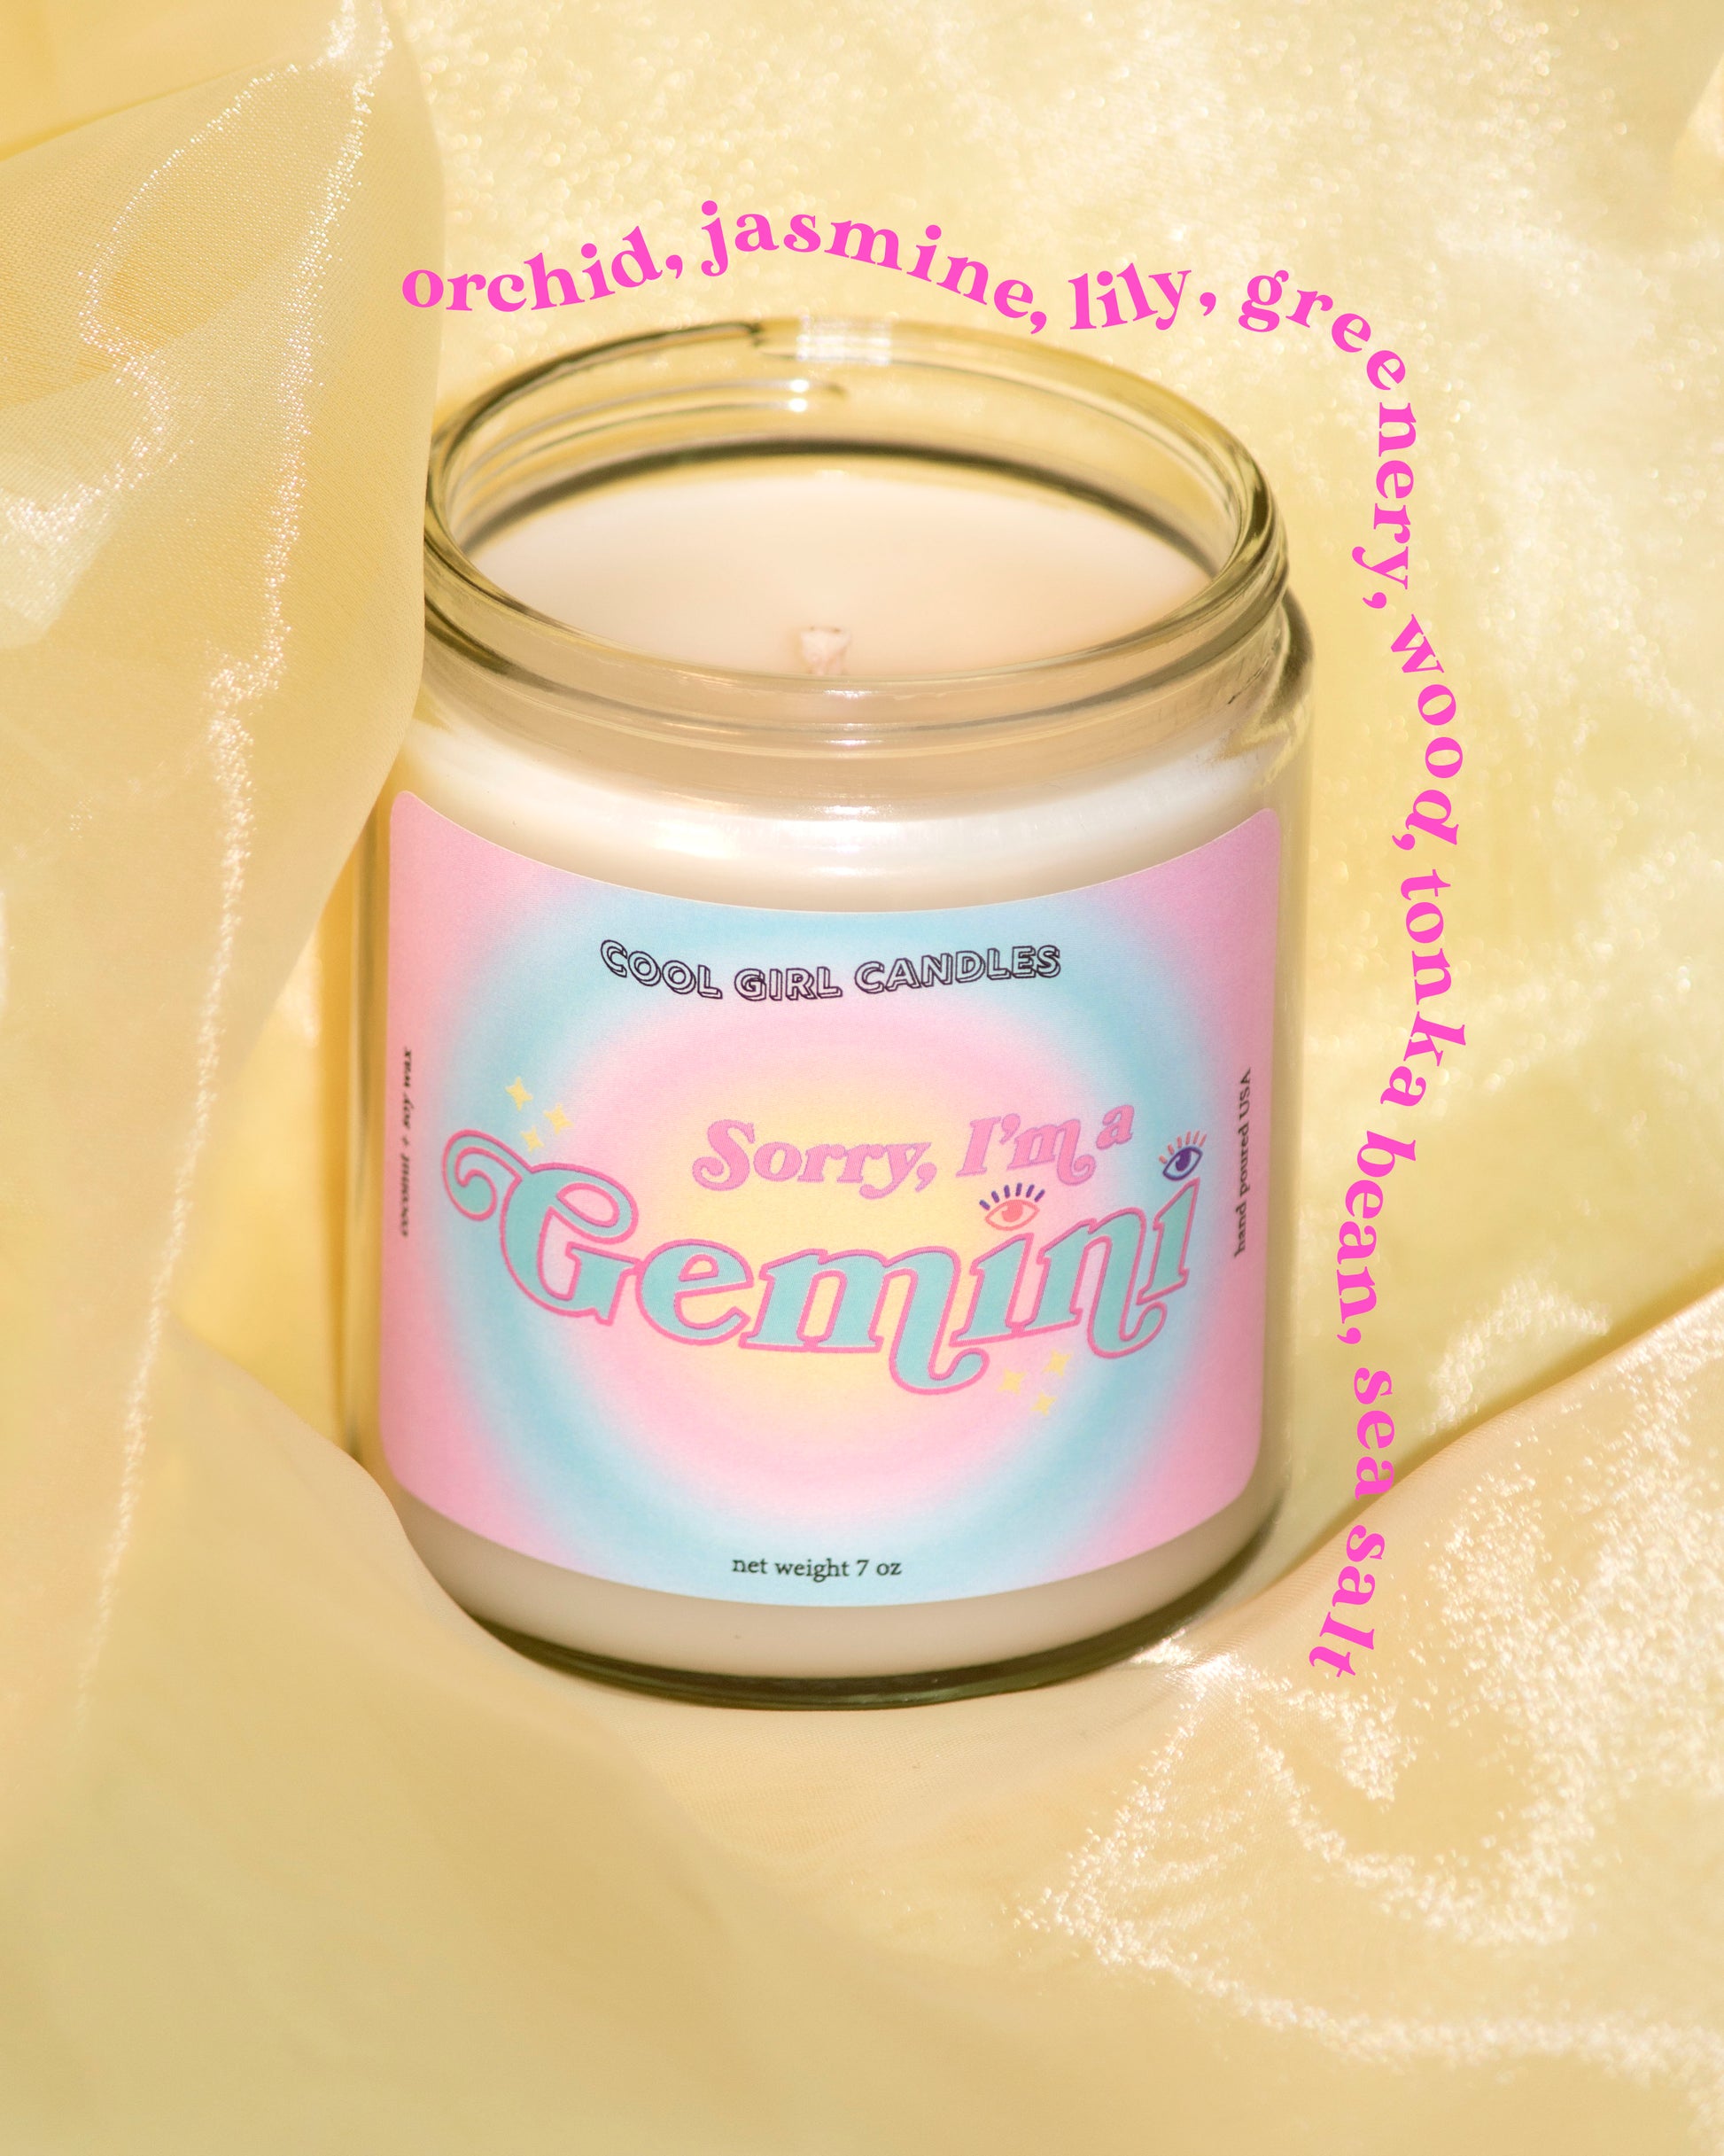 Gemini zodiac candle for the zodiac lovers. This candle says "sorry, I'm a gemini". A sassy zodiac scented candle for astrology and horoscope lovers. 